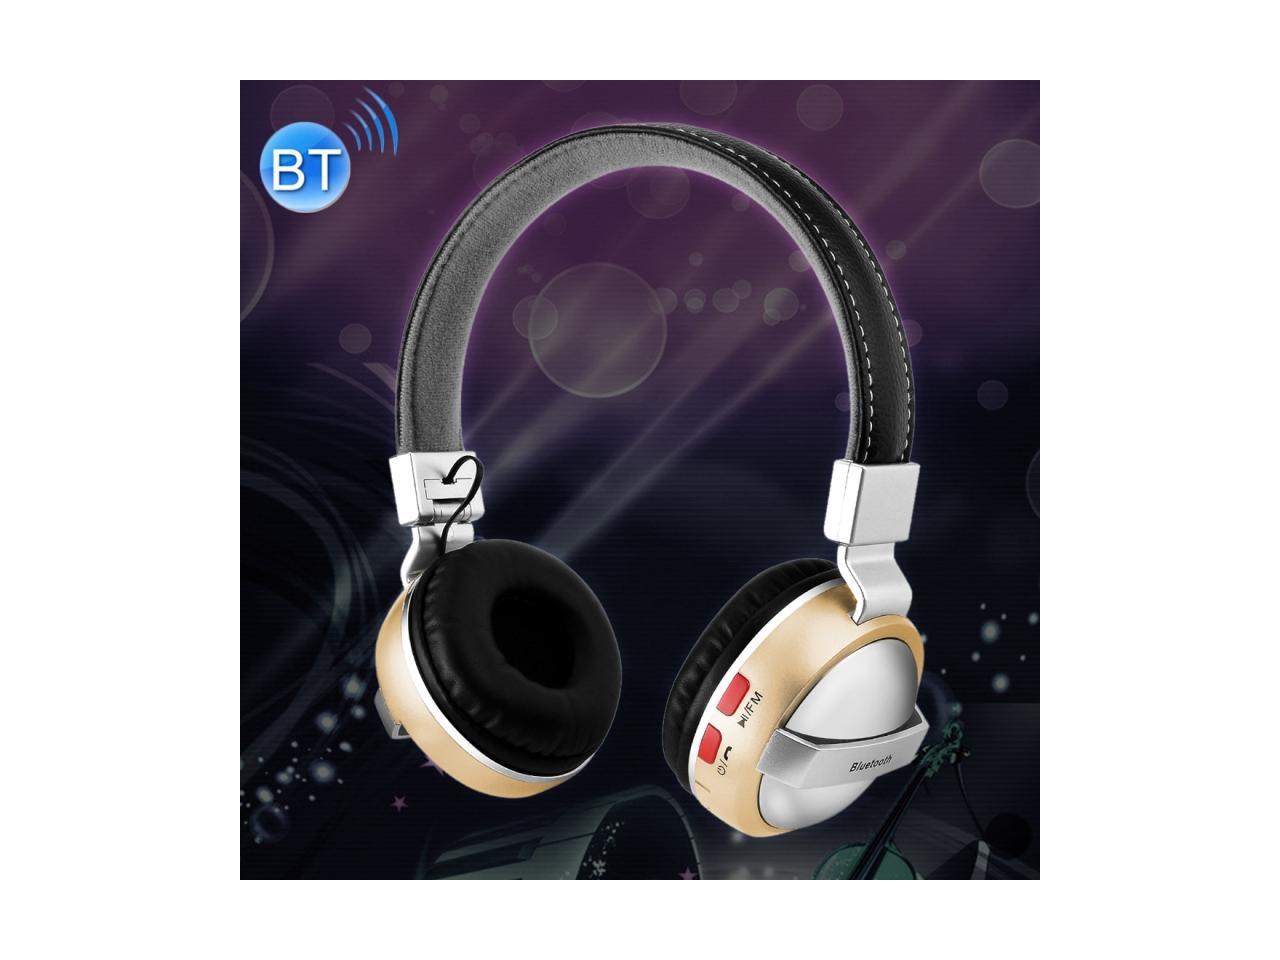 BTH-868 Stereo Sound Quality V4.2 Bluetooth Headphone, Bluetooth Distance: 10m, Support 3.5mm Audio Input & FM, for iPhone, Samsung, HTC, Sony and other Smartphones (gold)